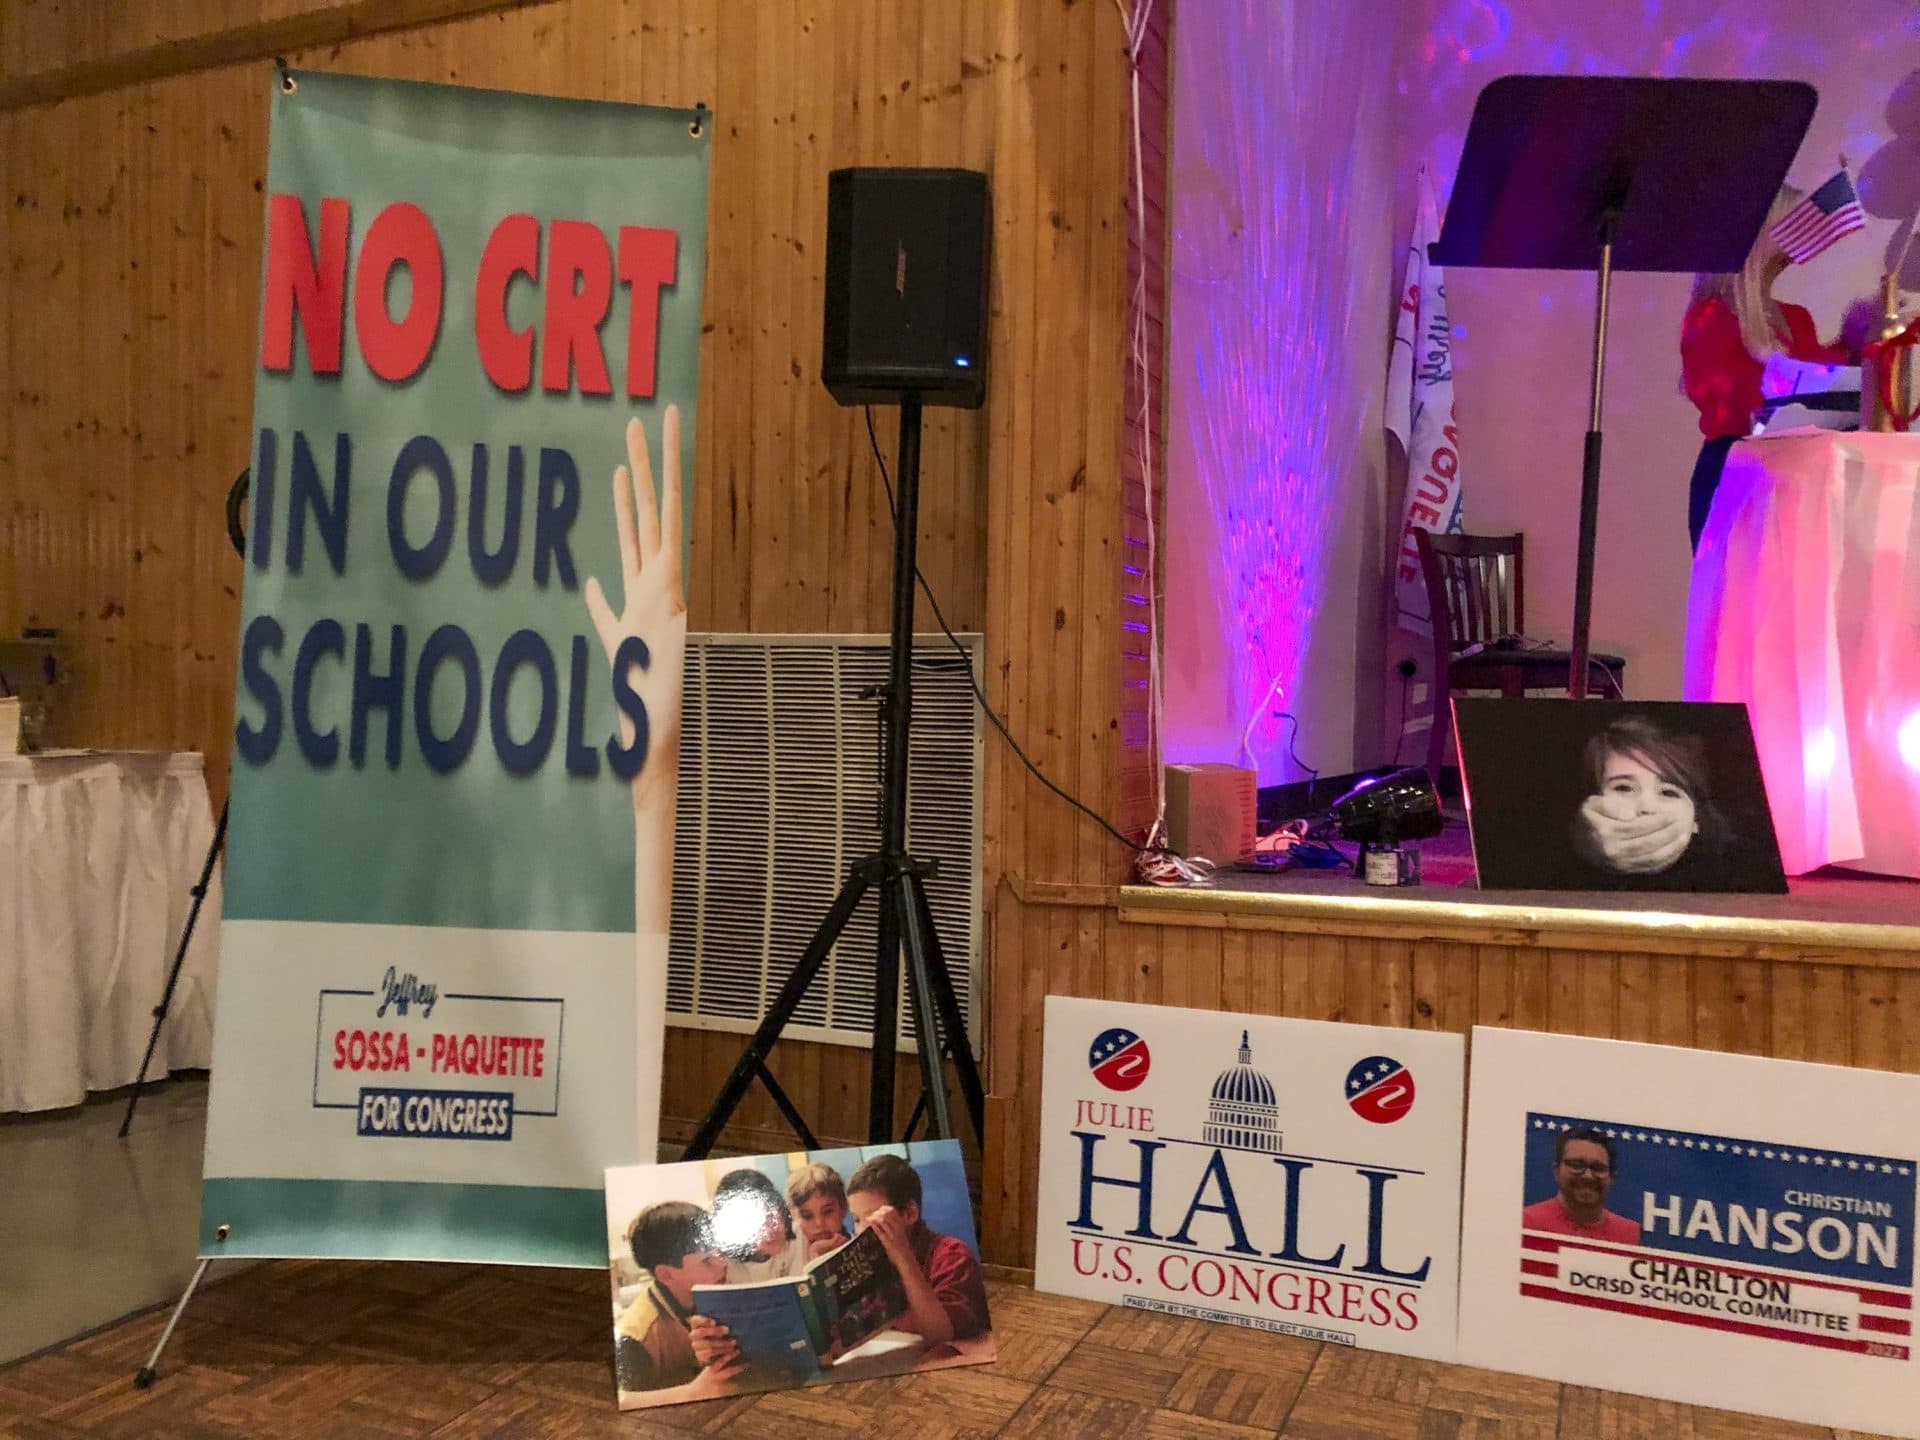 An anti-&quot;CRT,&quot; or critical race theory, sign at a forum for Republican political candidates to speak about public schools in Auburn on Jan. 13. (Wilder Fleming/WBUR)